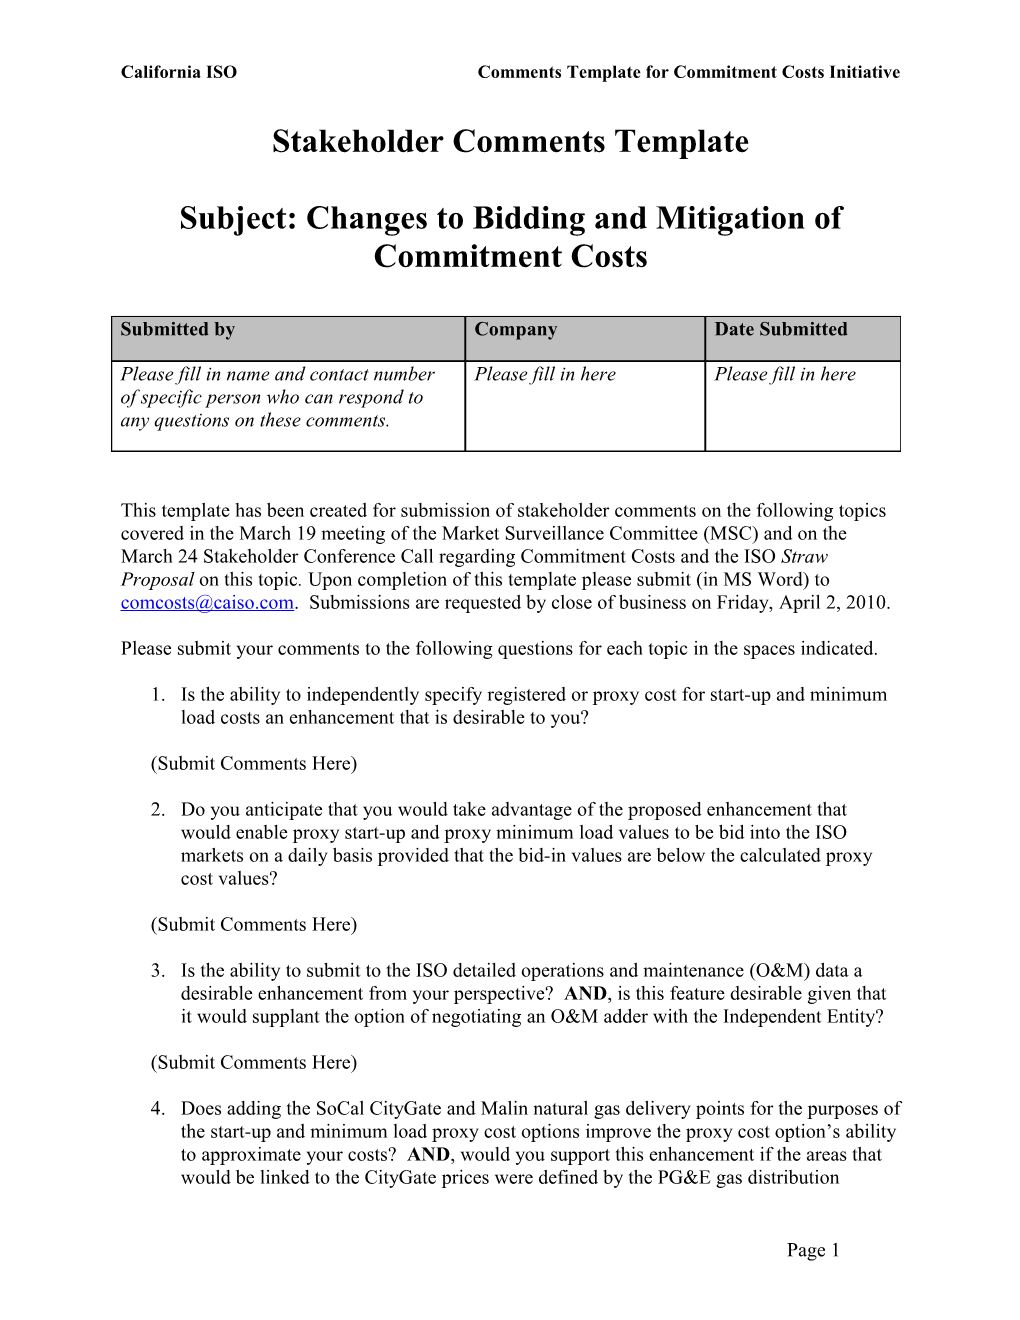 Comments Template - Straw Proposal on Changes to Bidding and Mitigation of Commitment Costs